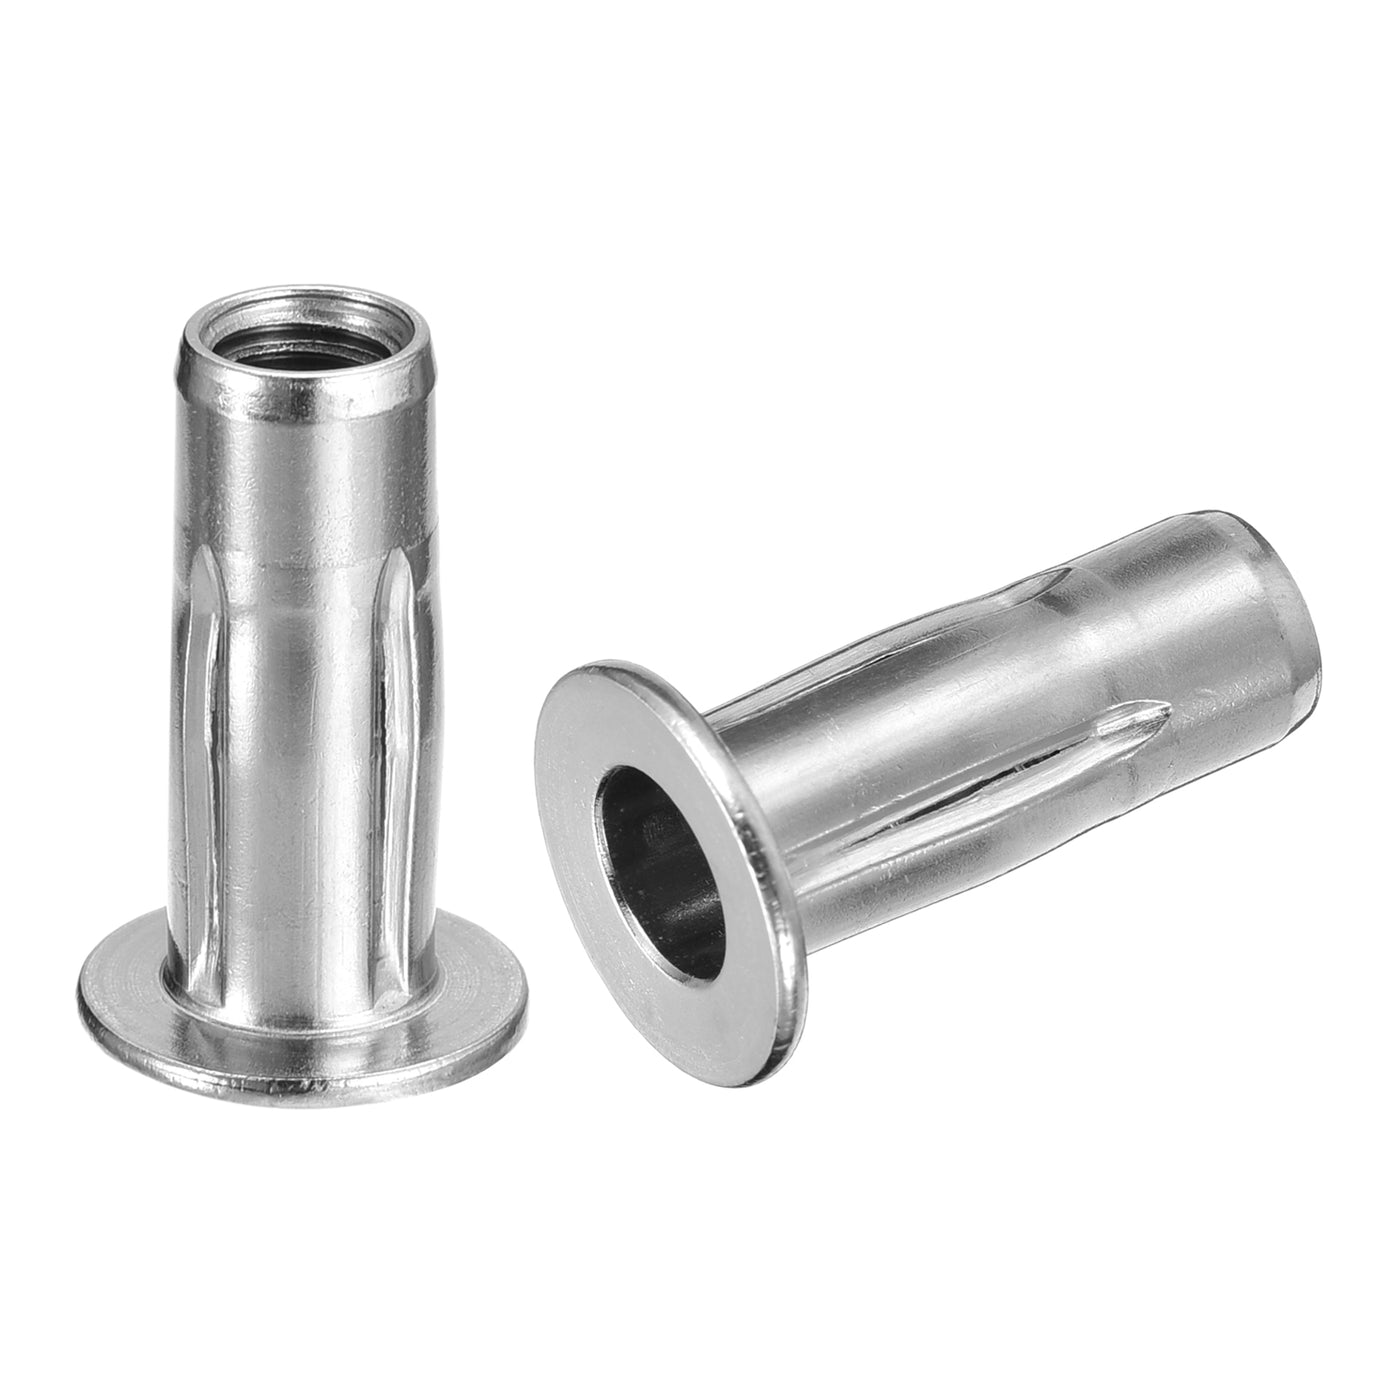 uxcell Uxcell Multi-Grip Rivet Nuts, Pre-Bulbed Shank Flat Head Threaded Insert Nut 304 Stainless Steel Plus Nuts